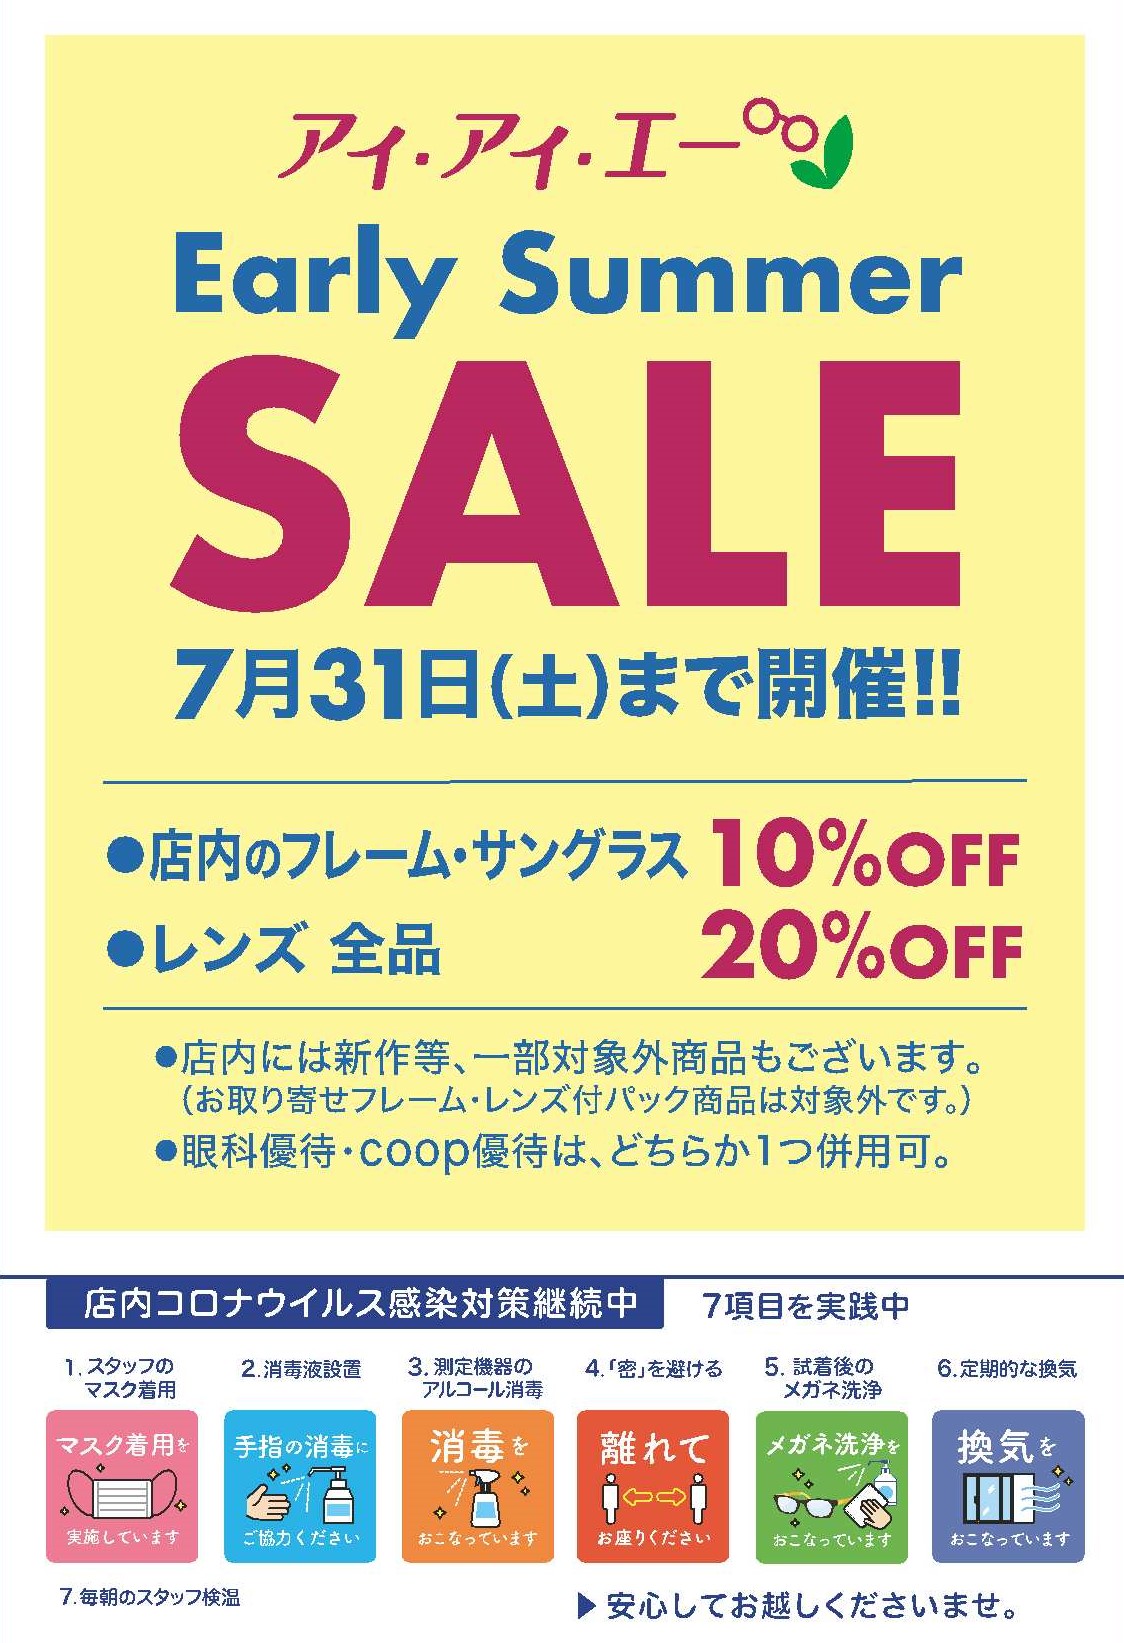 Early Summer SALE 開催中!!（7／31迄)